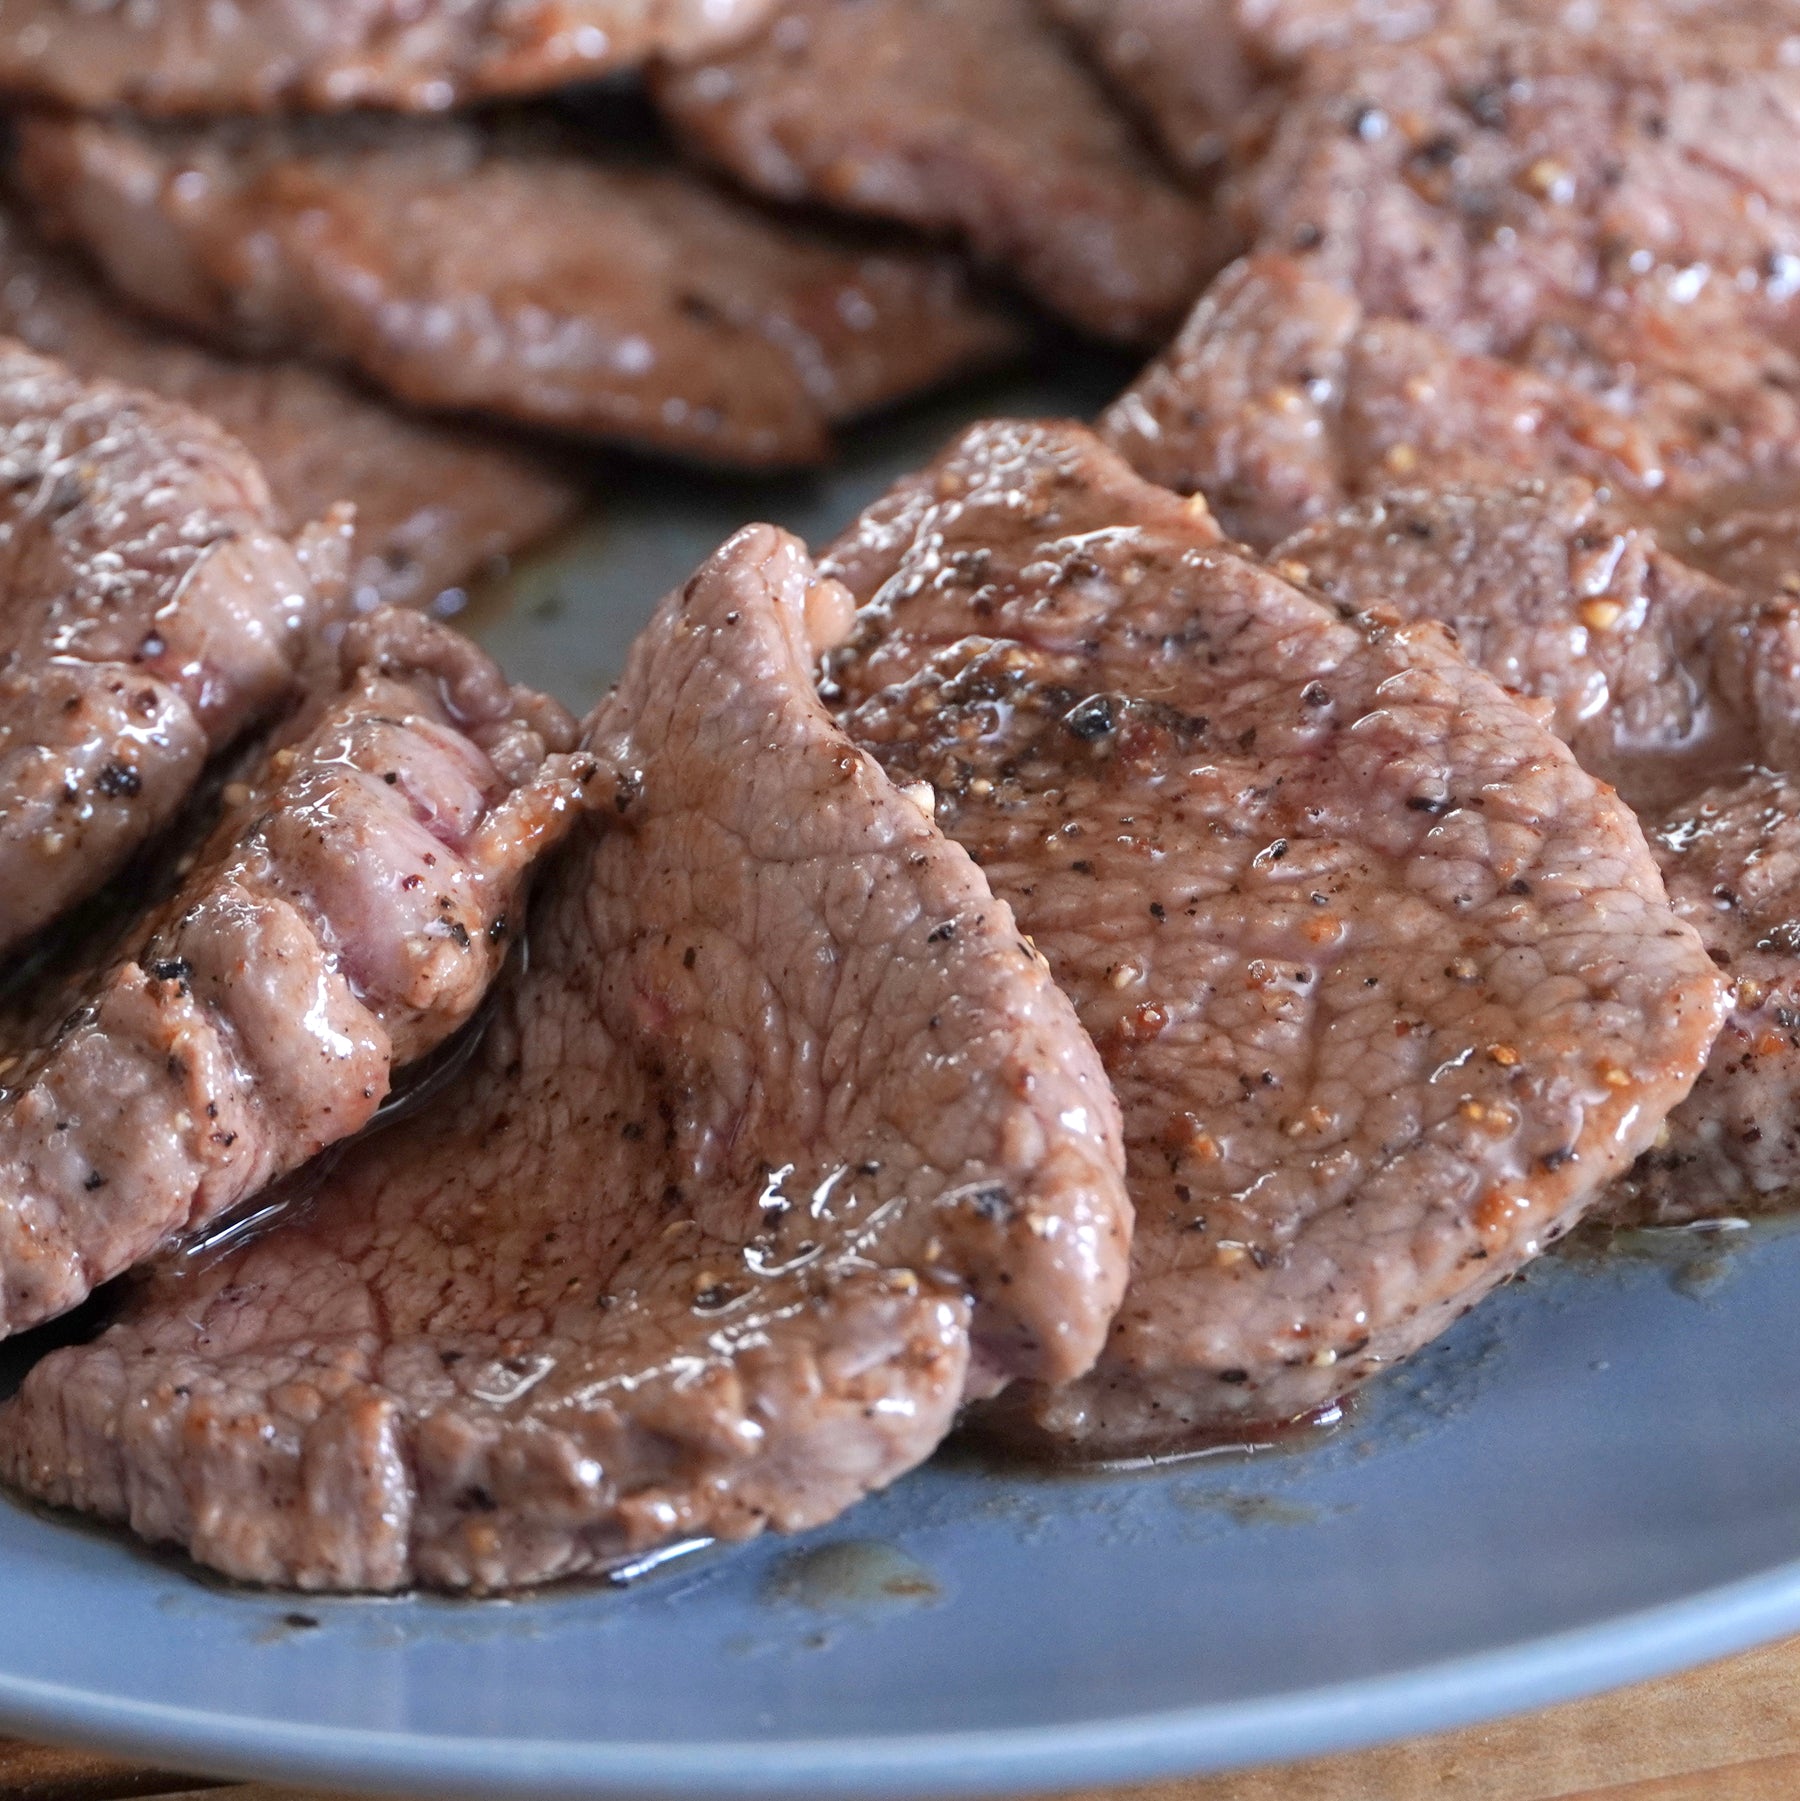 Grass-Fed Beef Teres Major / Petite Tender Slices from New Zealand (300g) - Horizon Farms